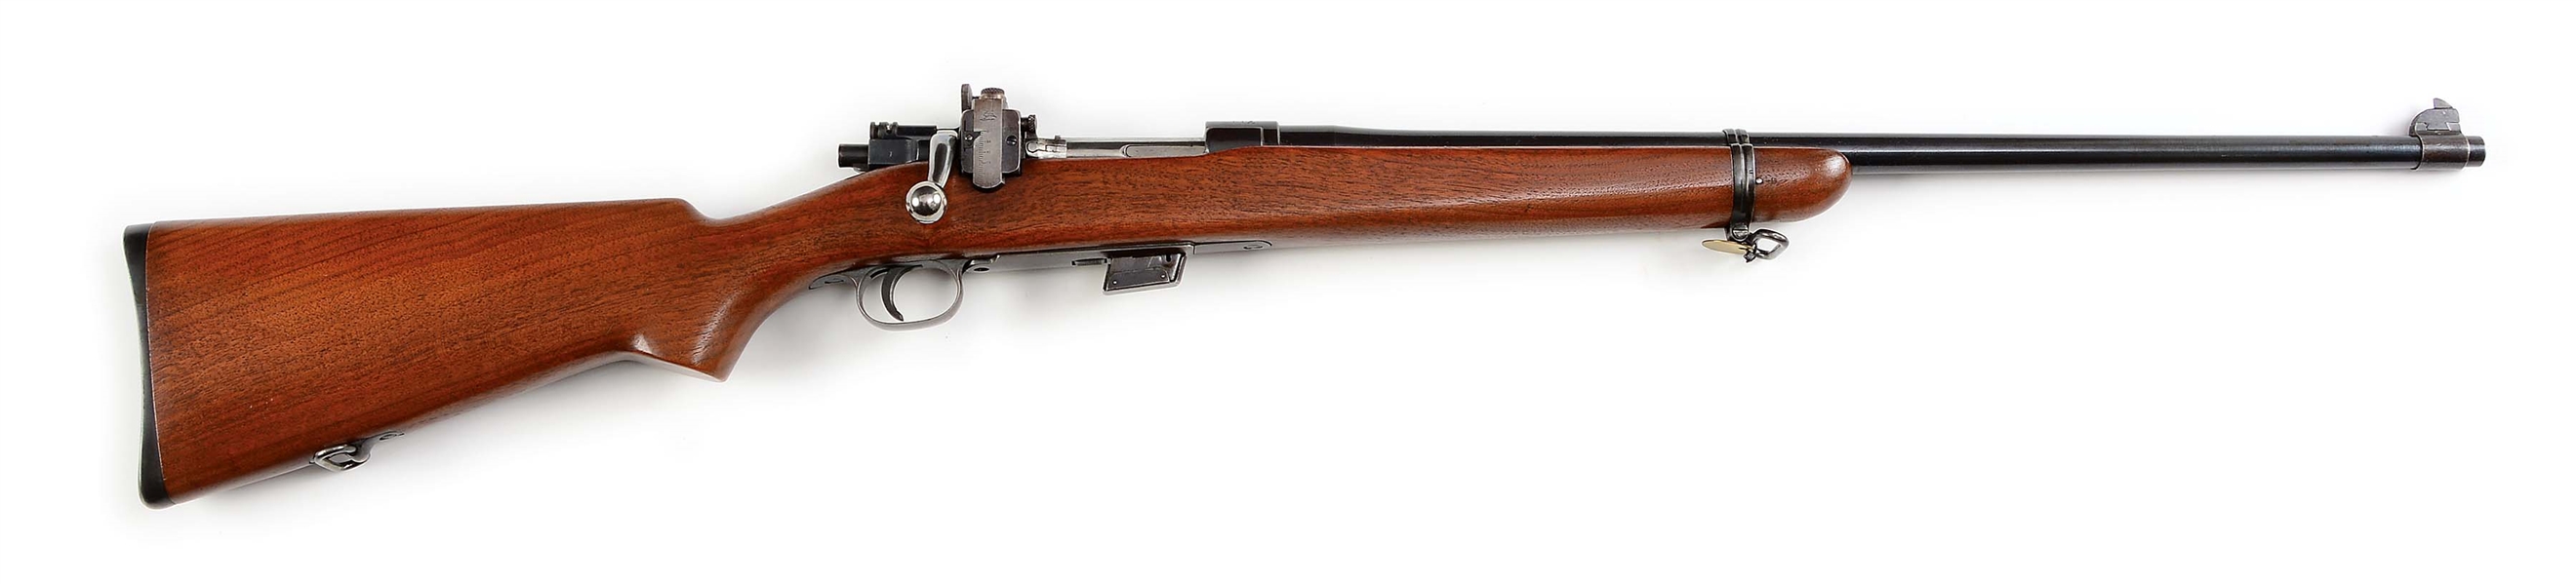 (C) SUPERB SPRINGFIELD 1922 .22 RIFLE WITH SERIAL NUMBER 114.